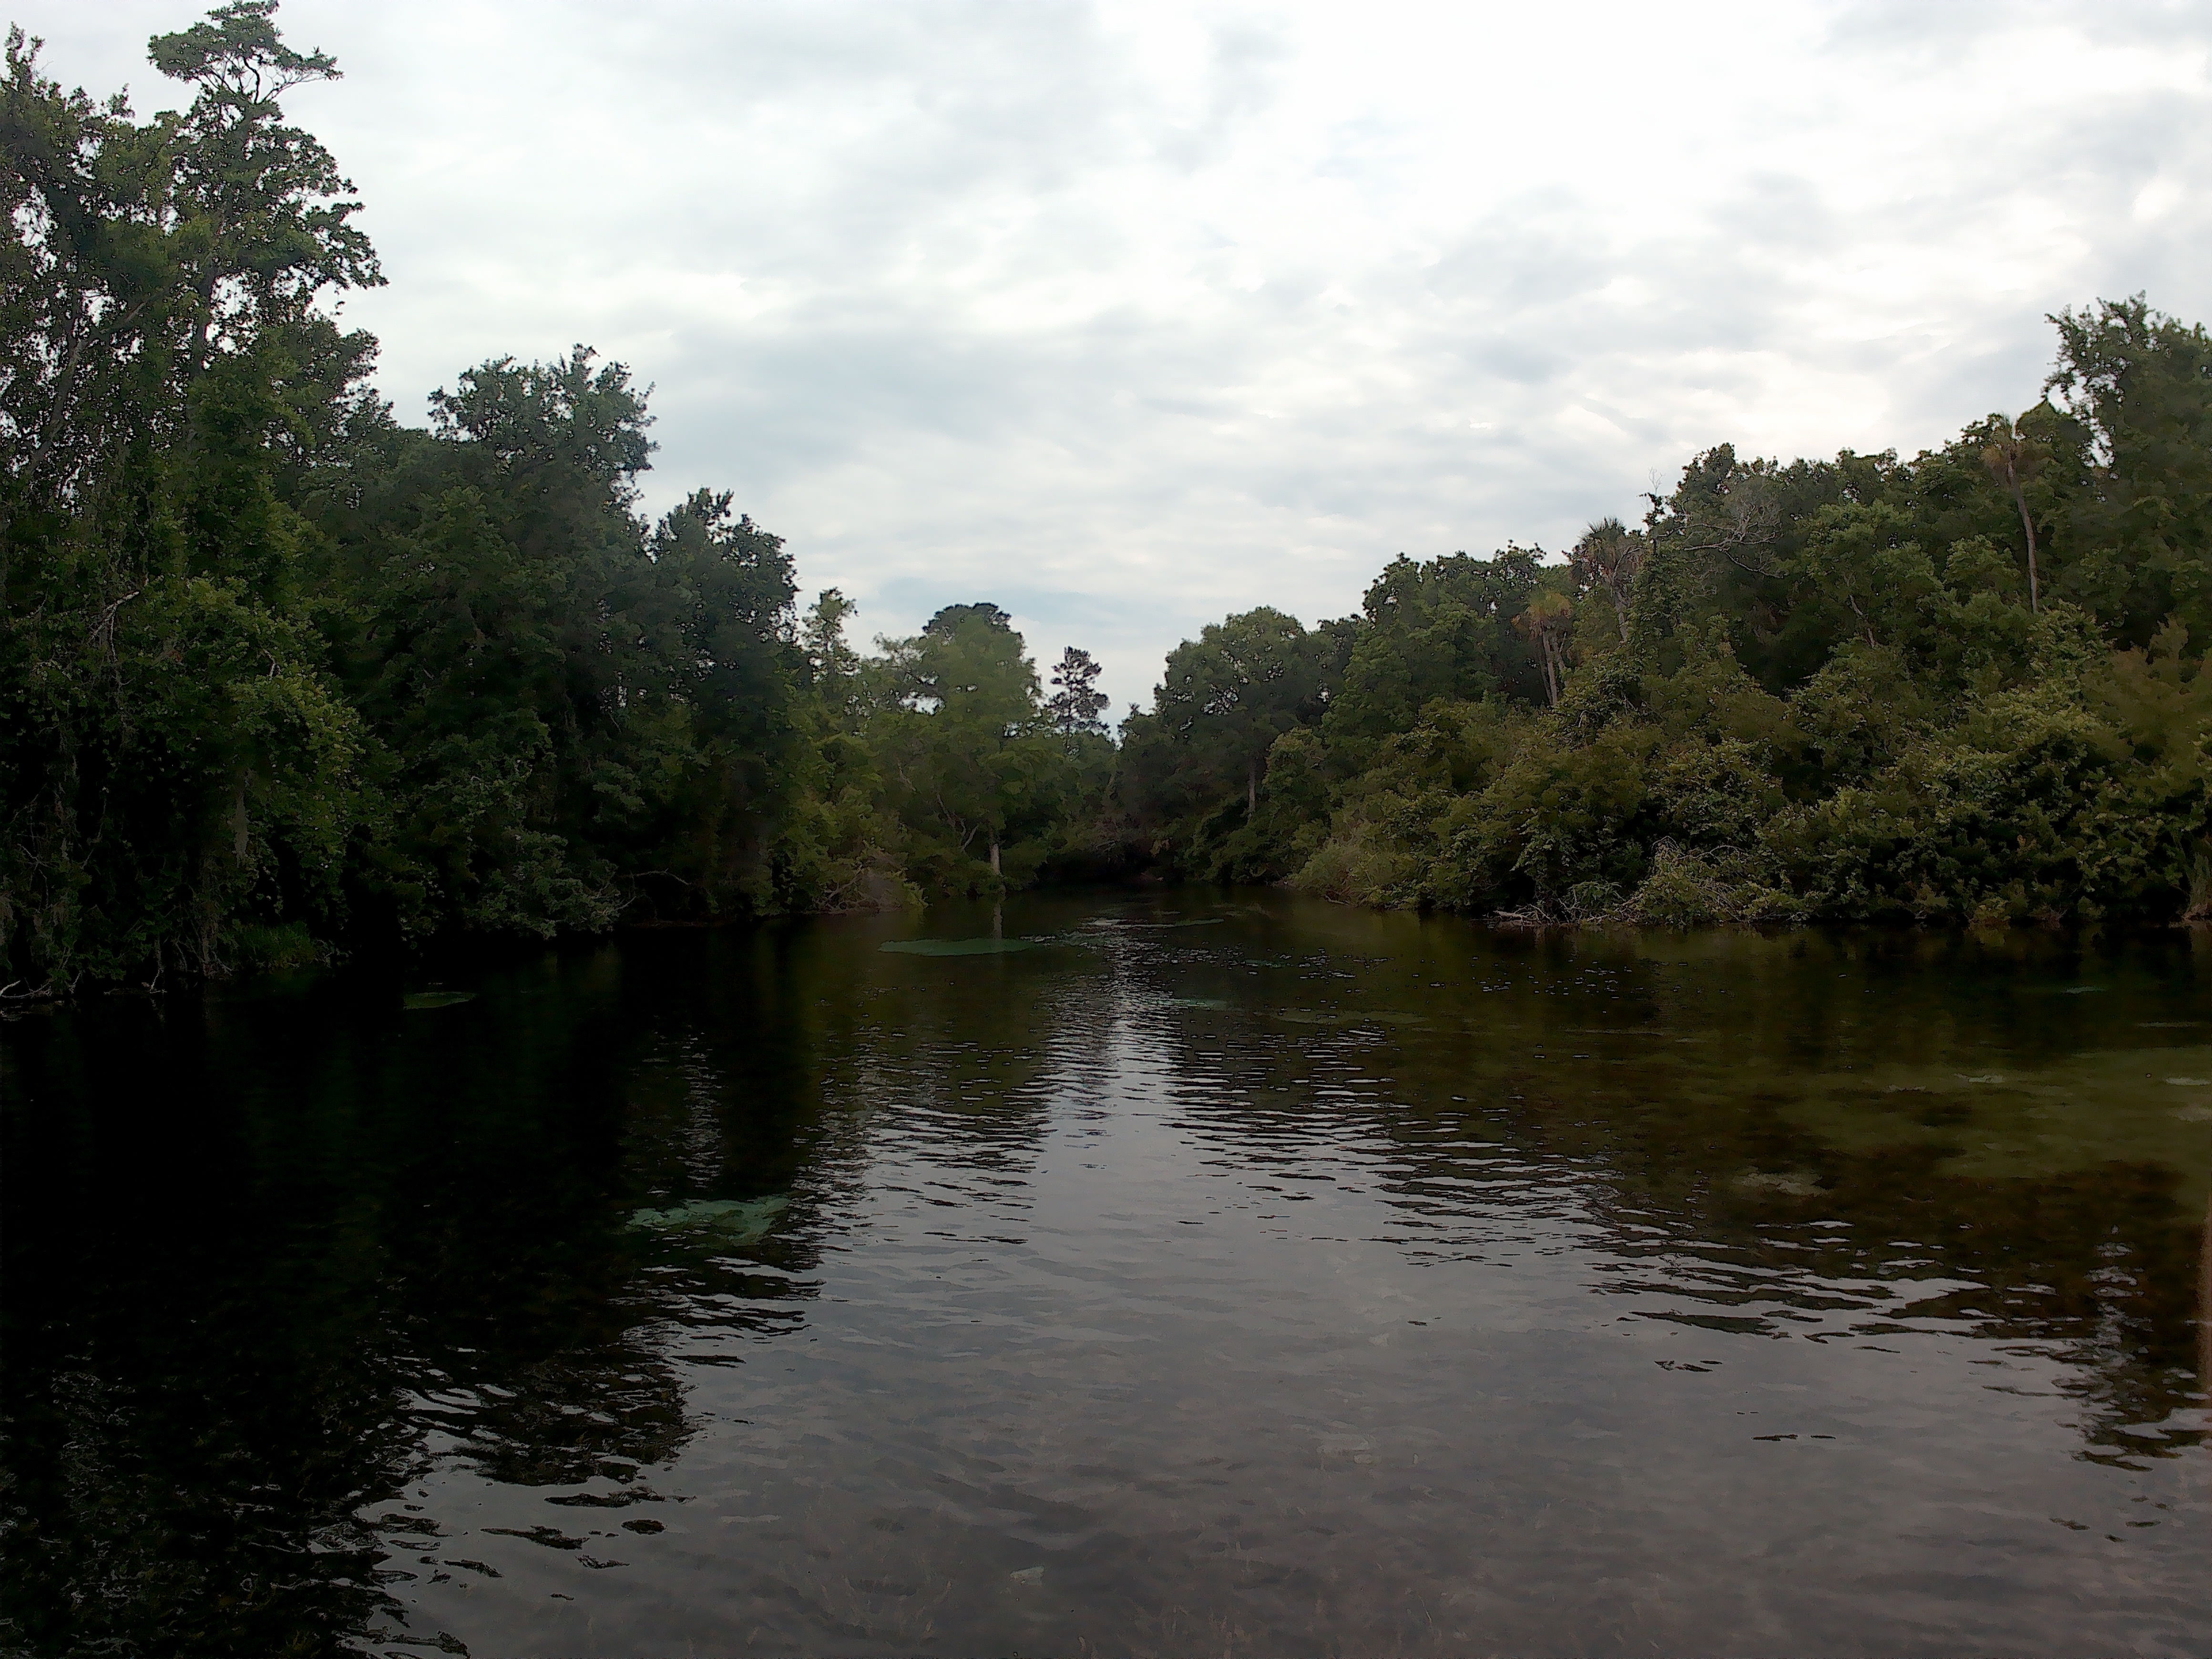 The Weeki Wachee River, from the view of a SUP board